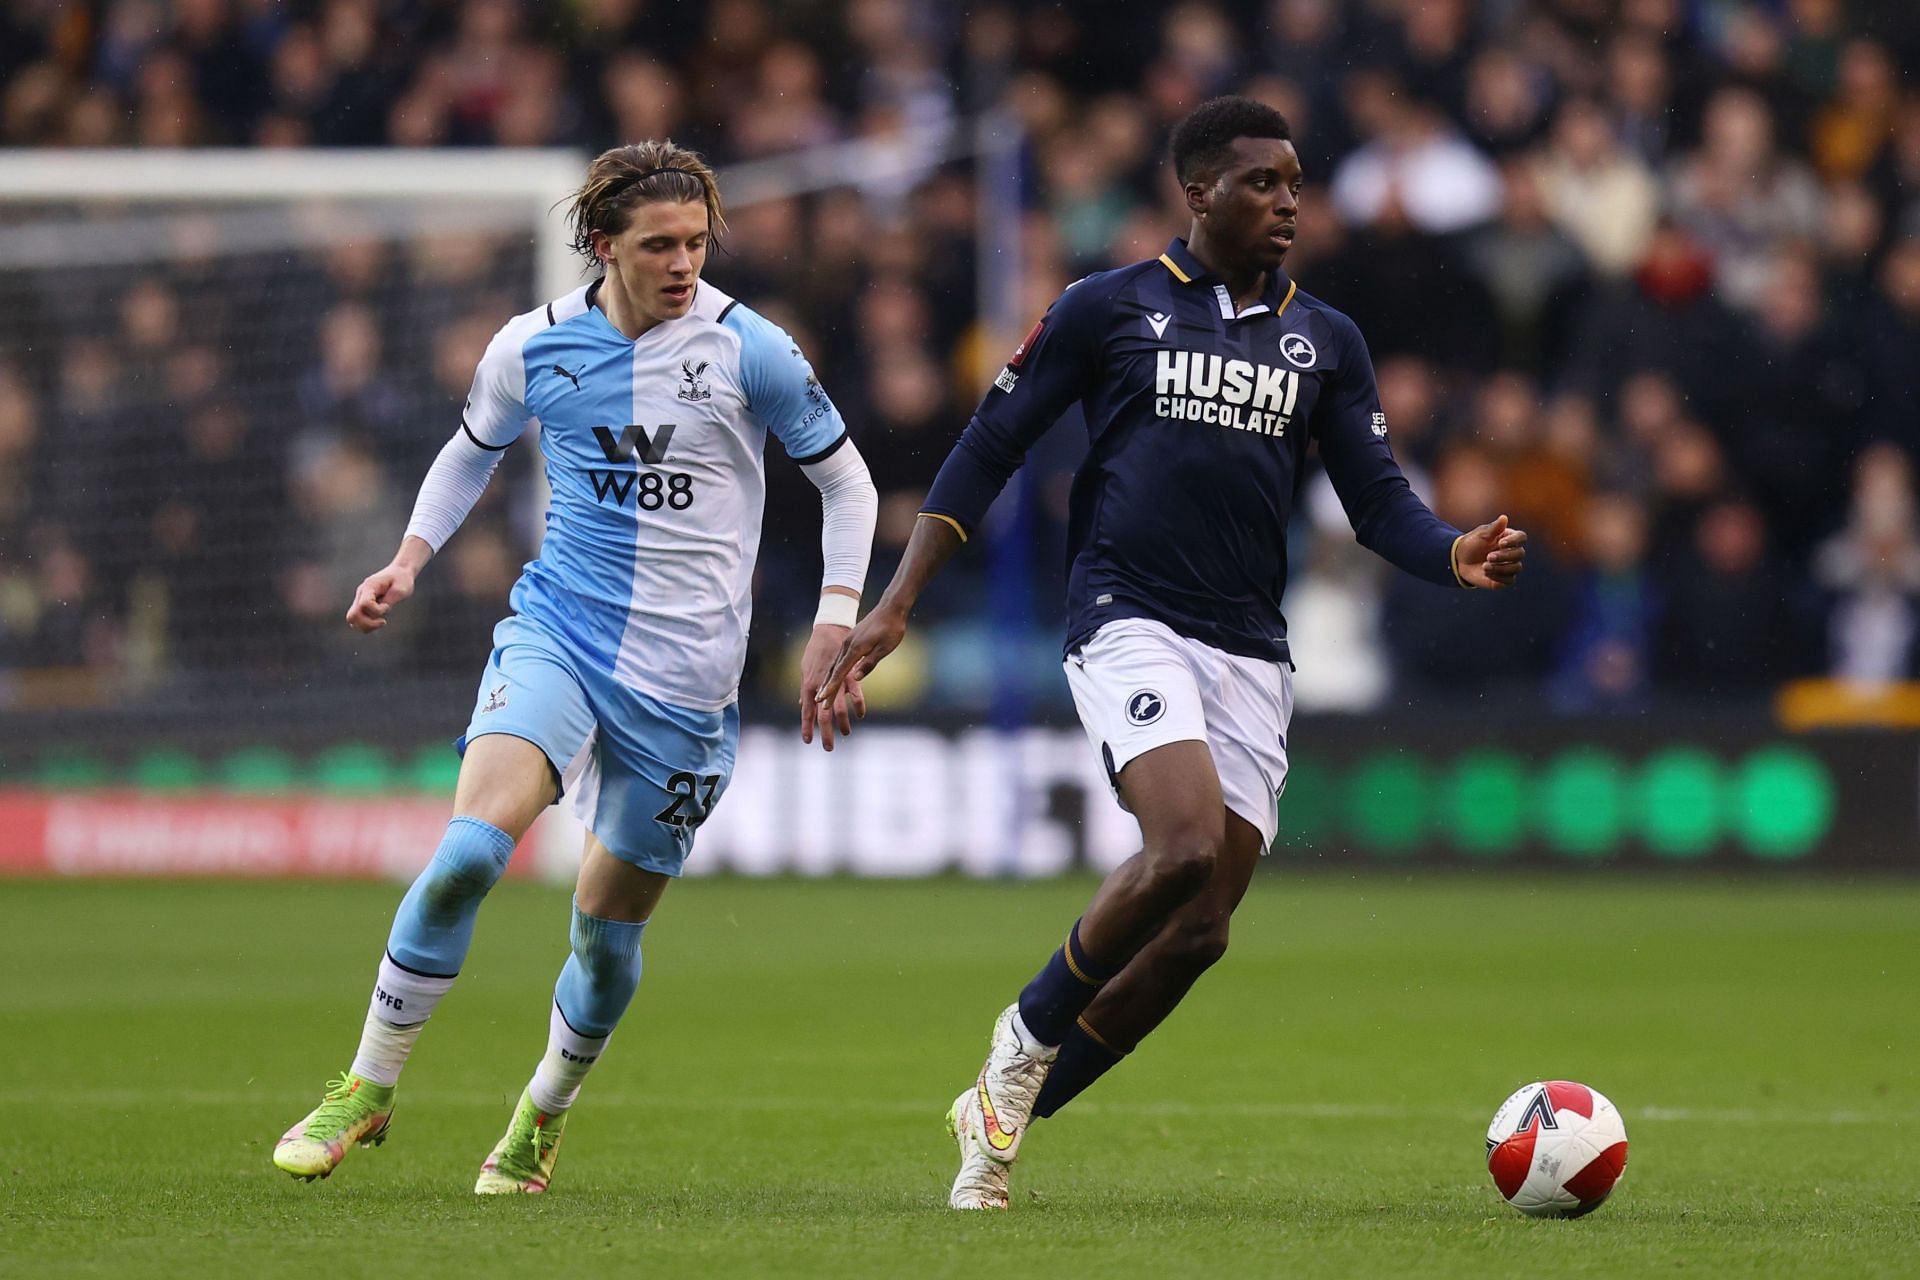 Ojo will be a huge miss for Millwall